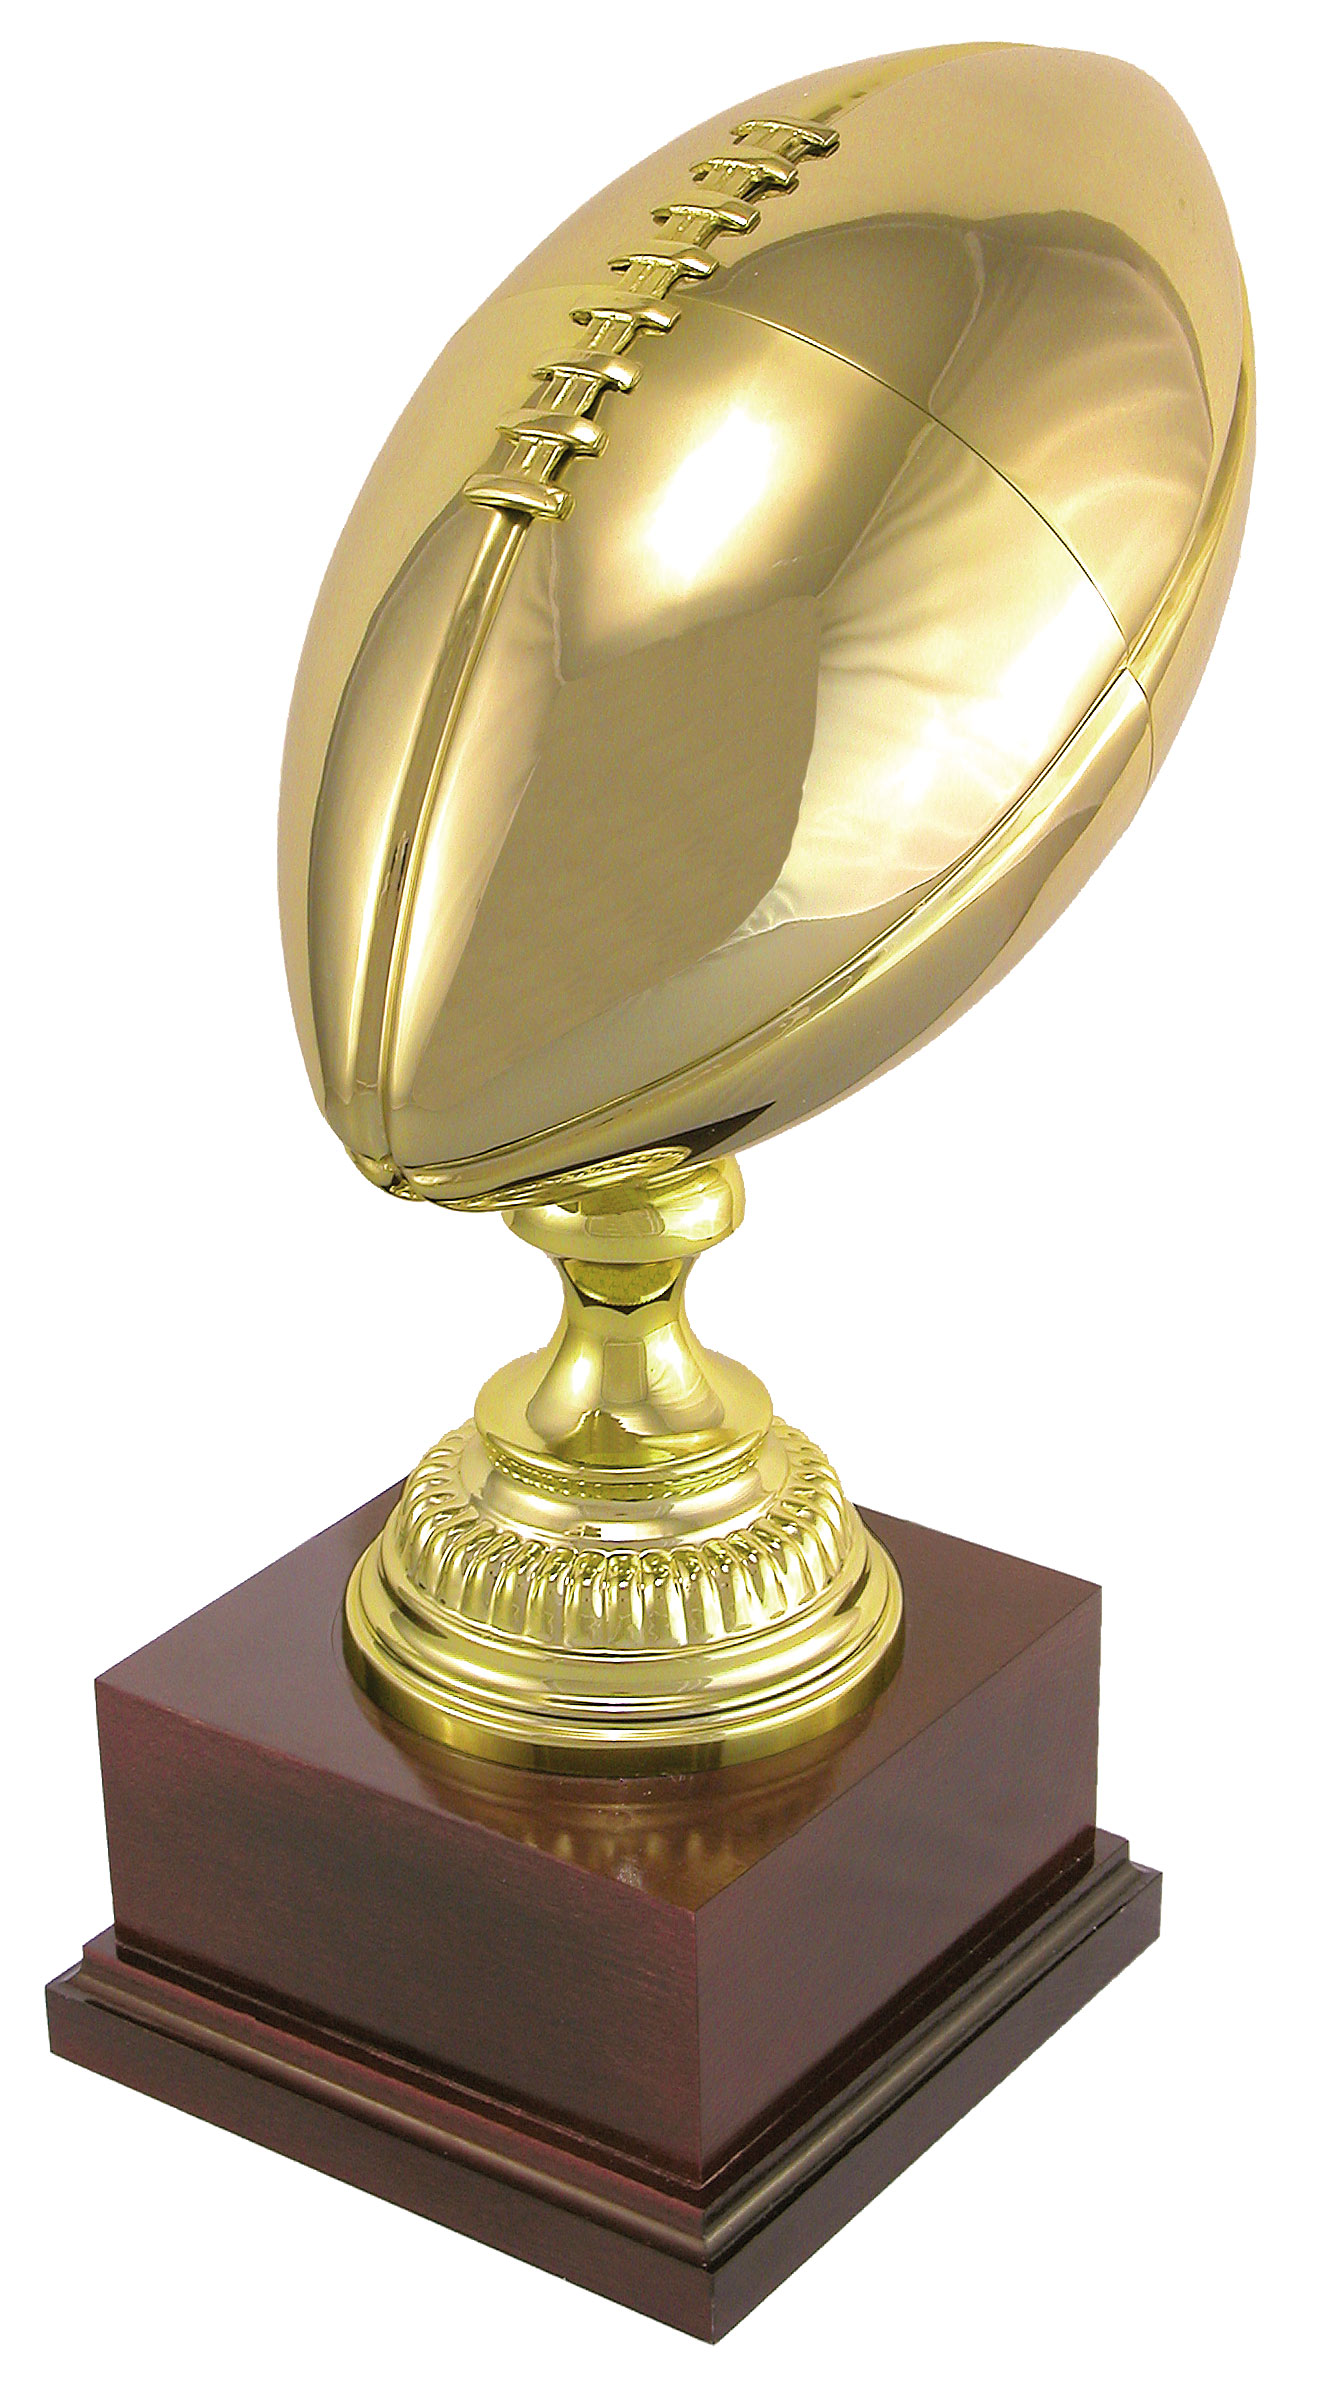 football trophy clipart